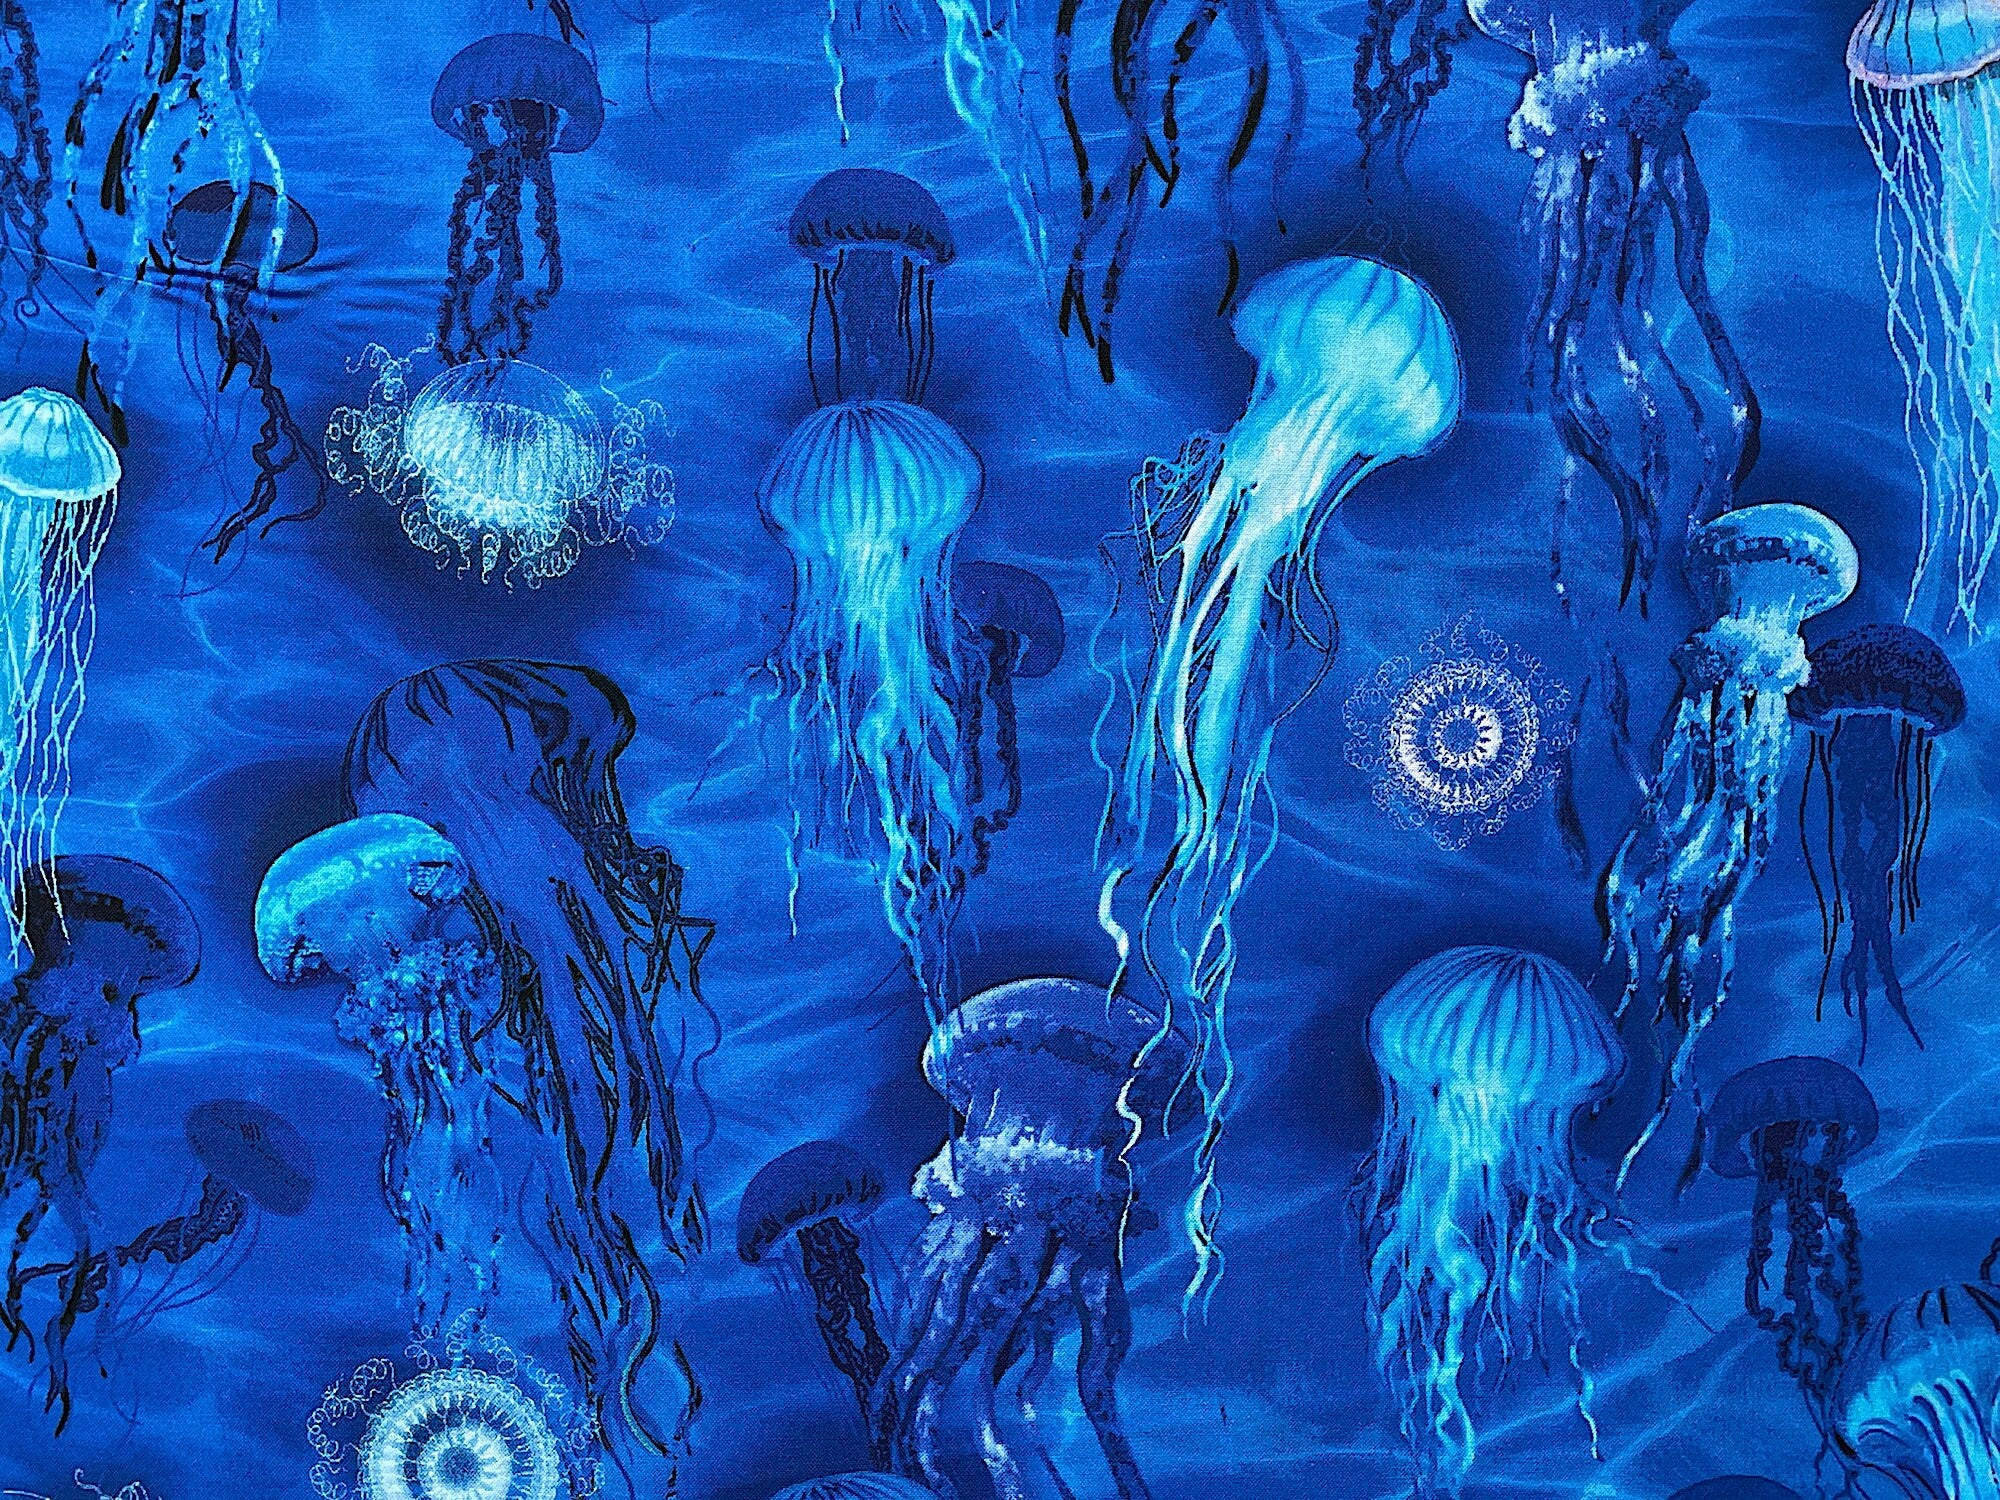 This fabric is called Jellyfish. This fabric is covered with jellyfish swimming in the water. This fabric is part of the Oceana collection by Kanvas Studio.